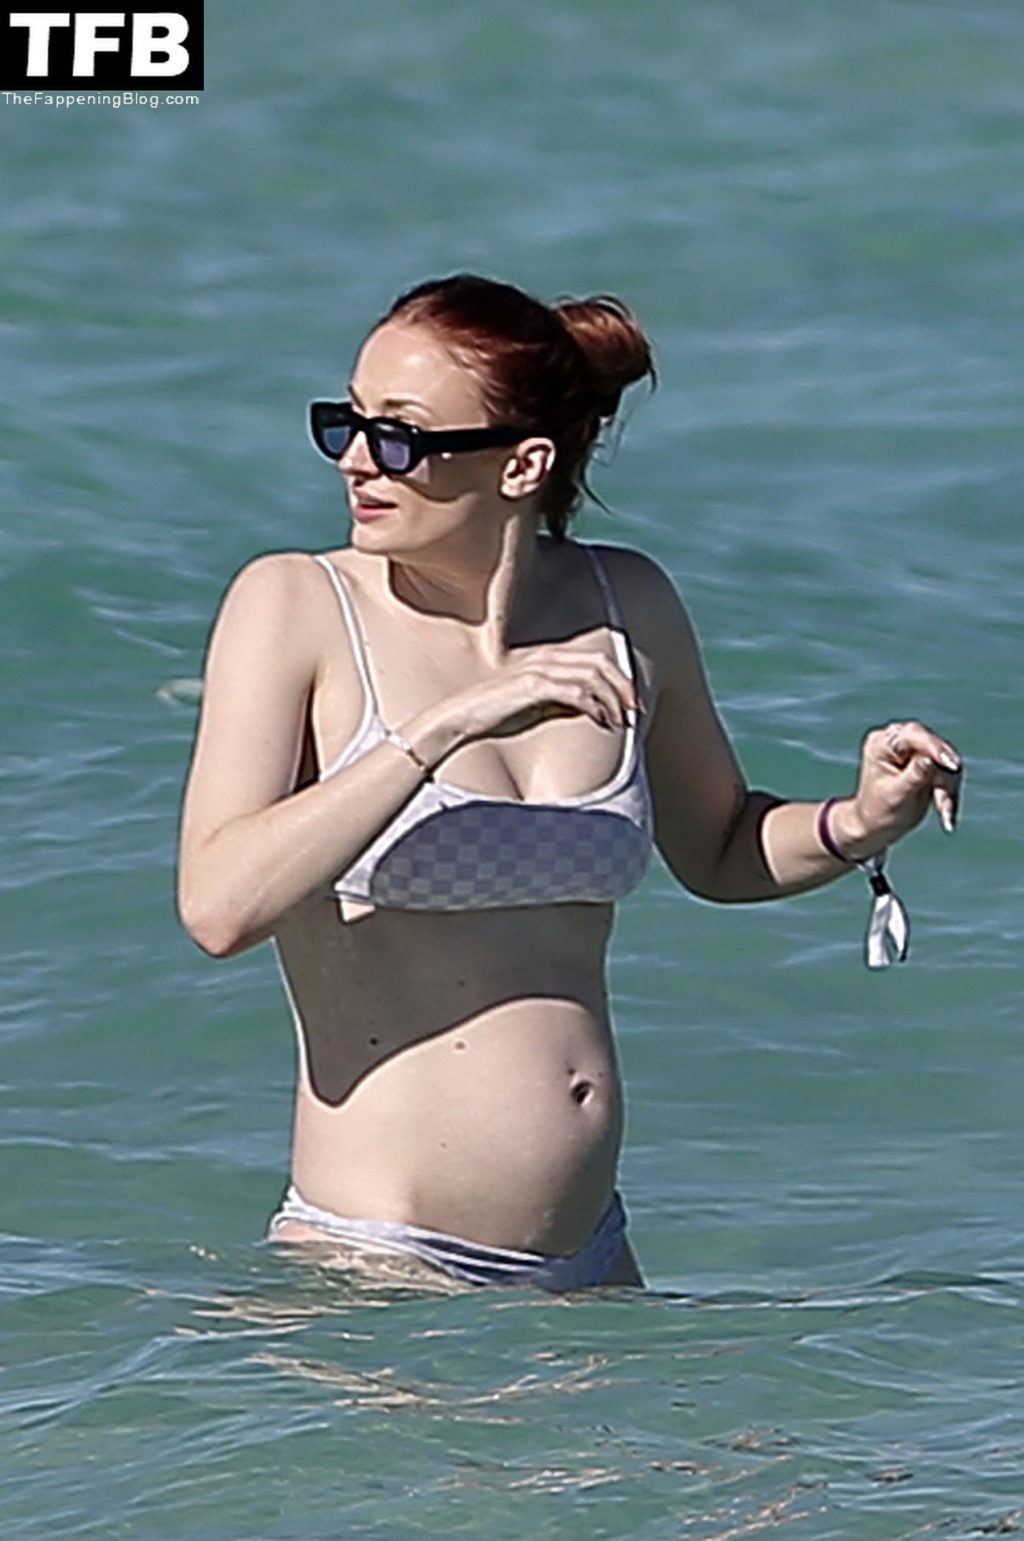 Sophie Turner Steps Out in a Bikini on the Beach in Miami (110 Photos)